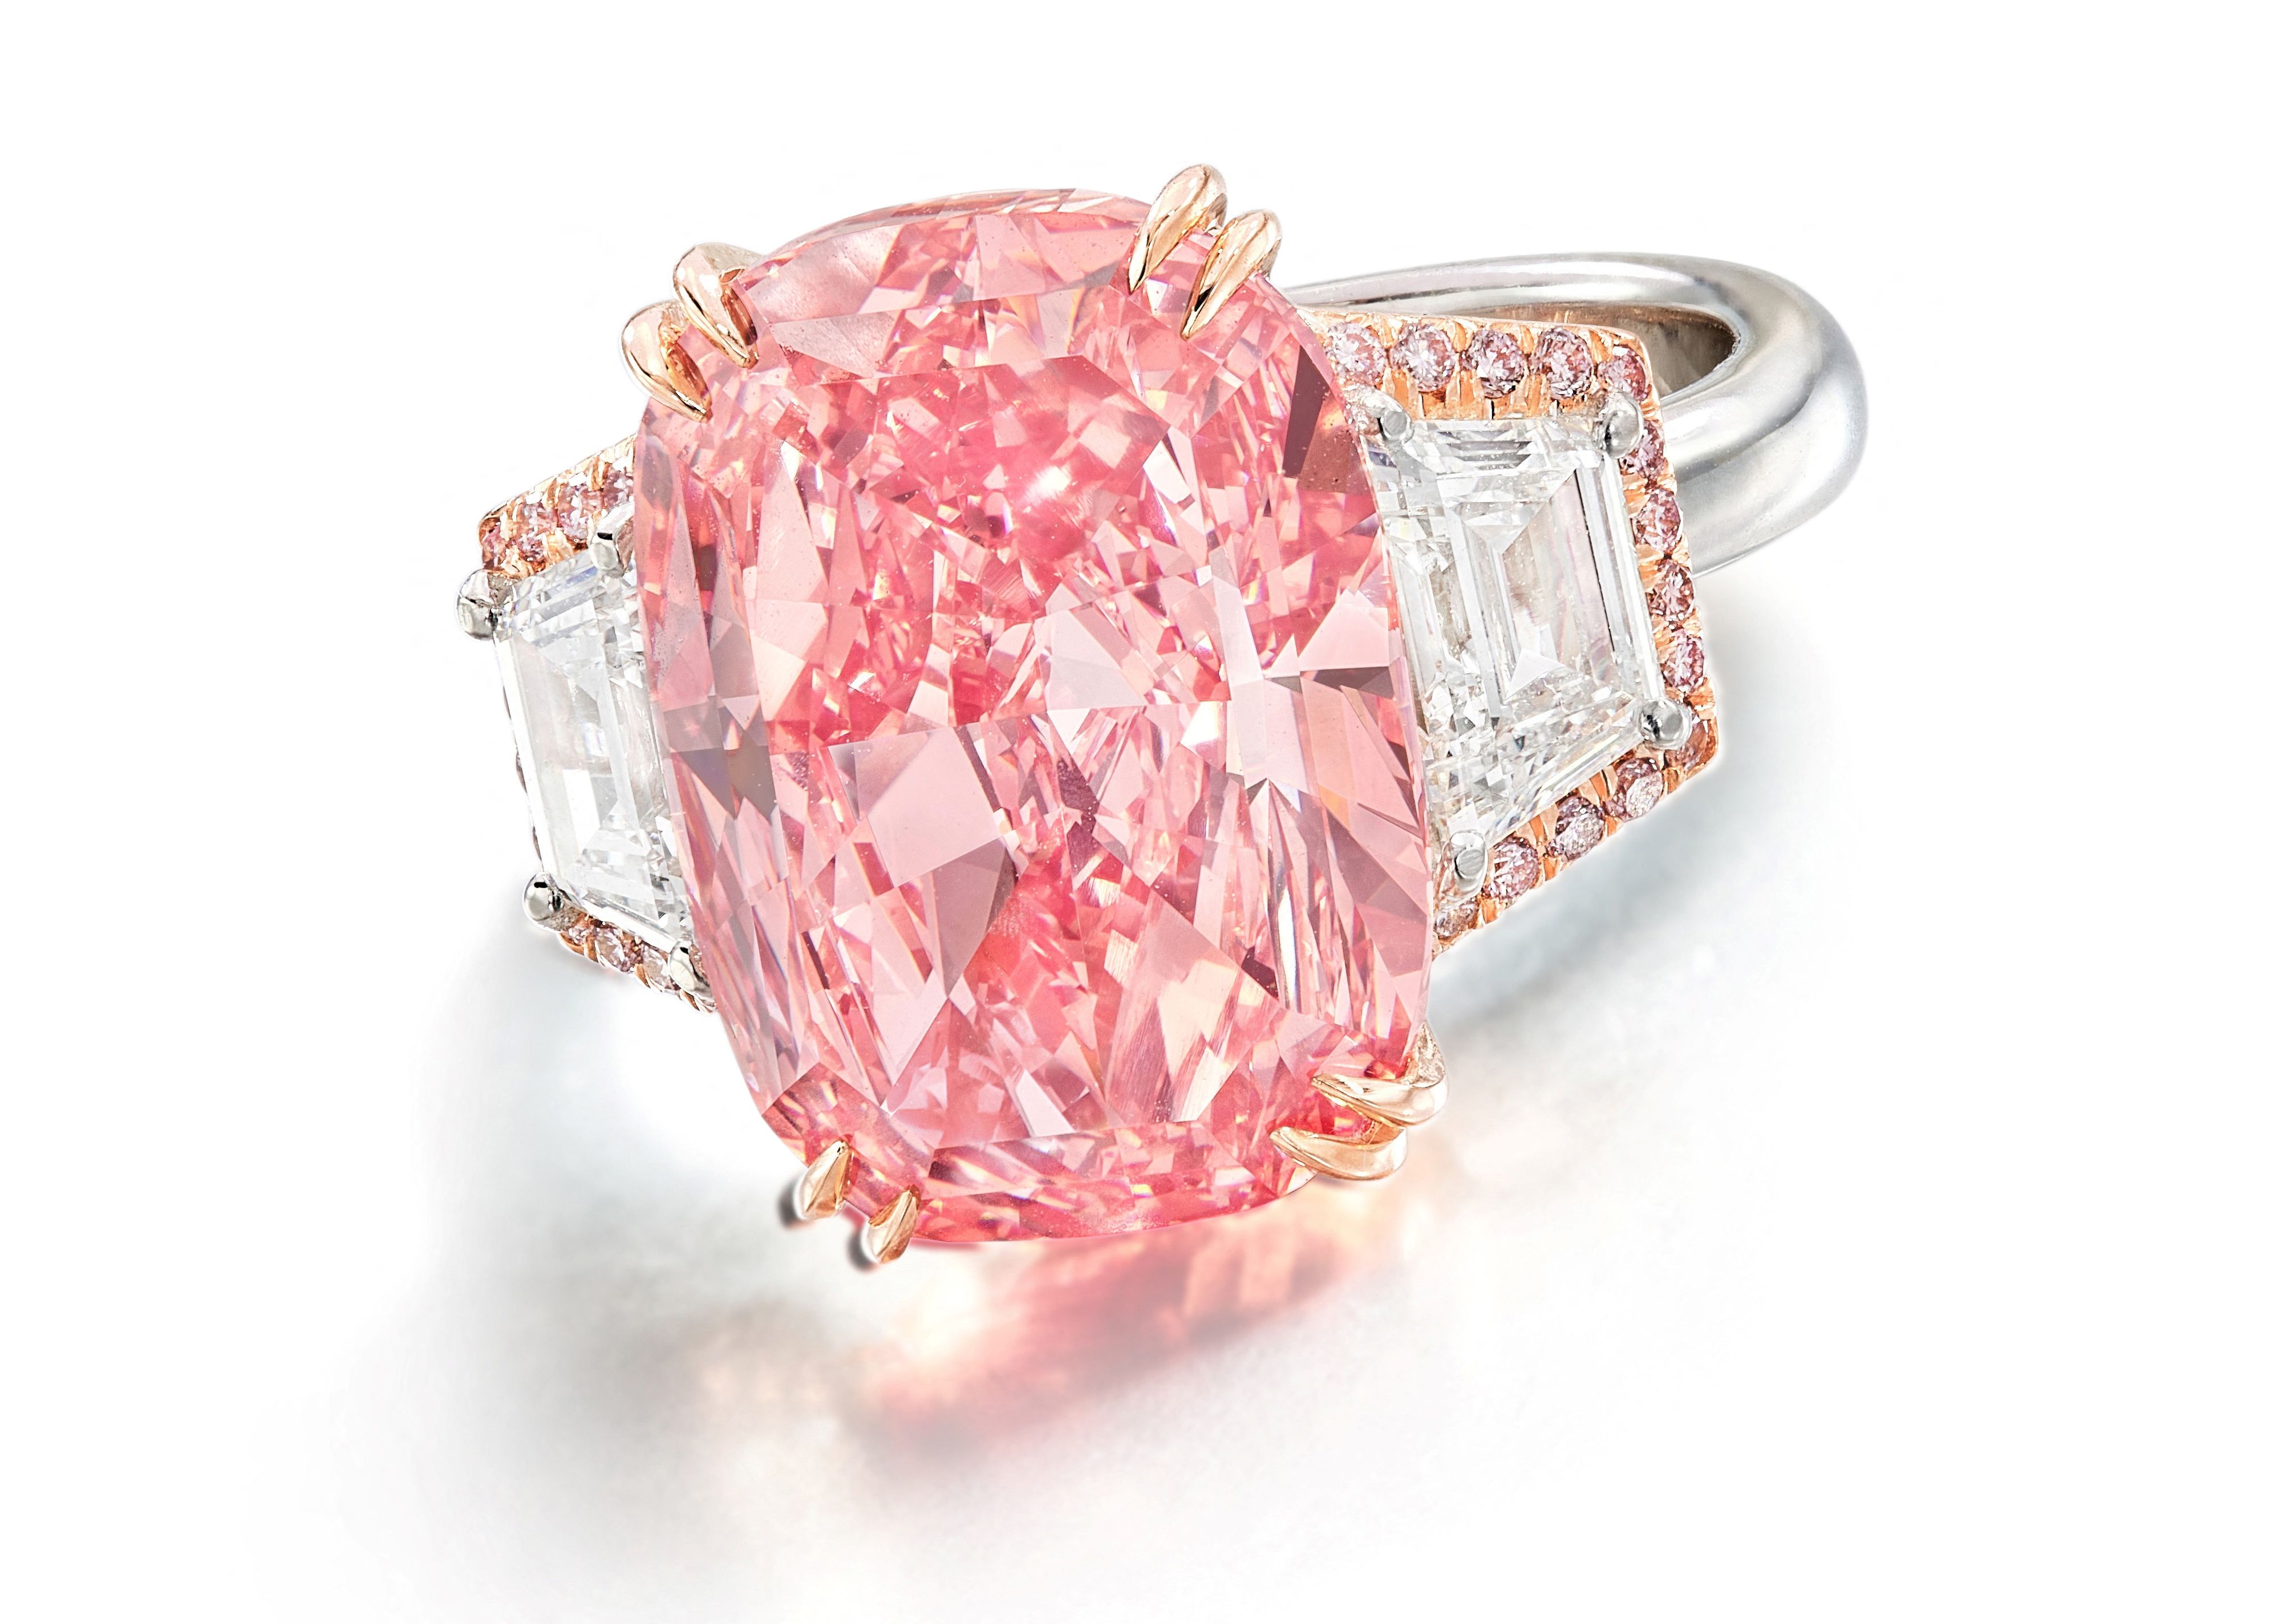 Can You Spot The Most Expensive Engagement Ring?